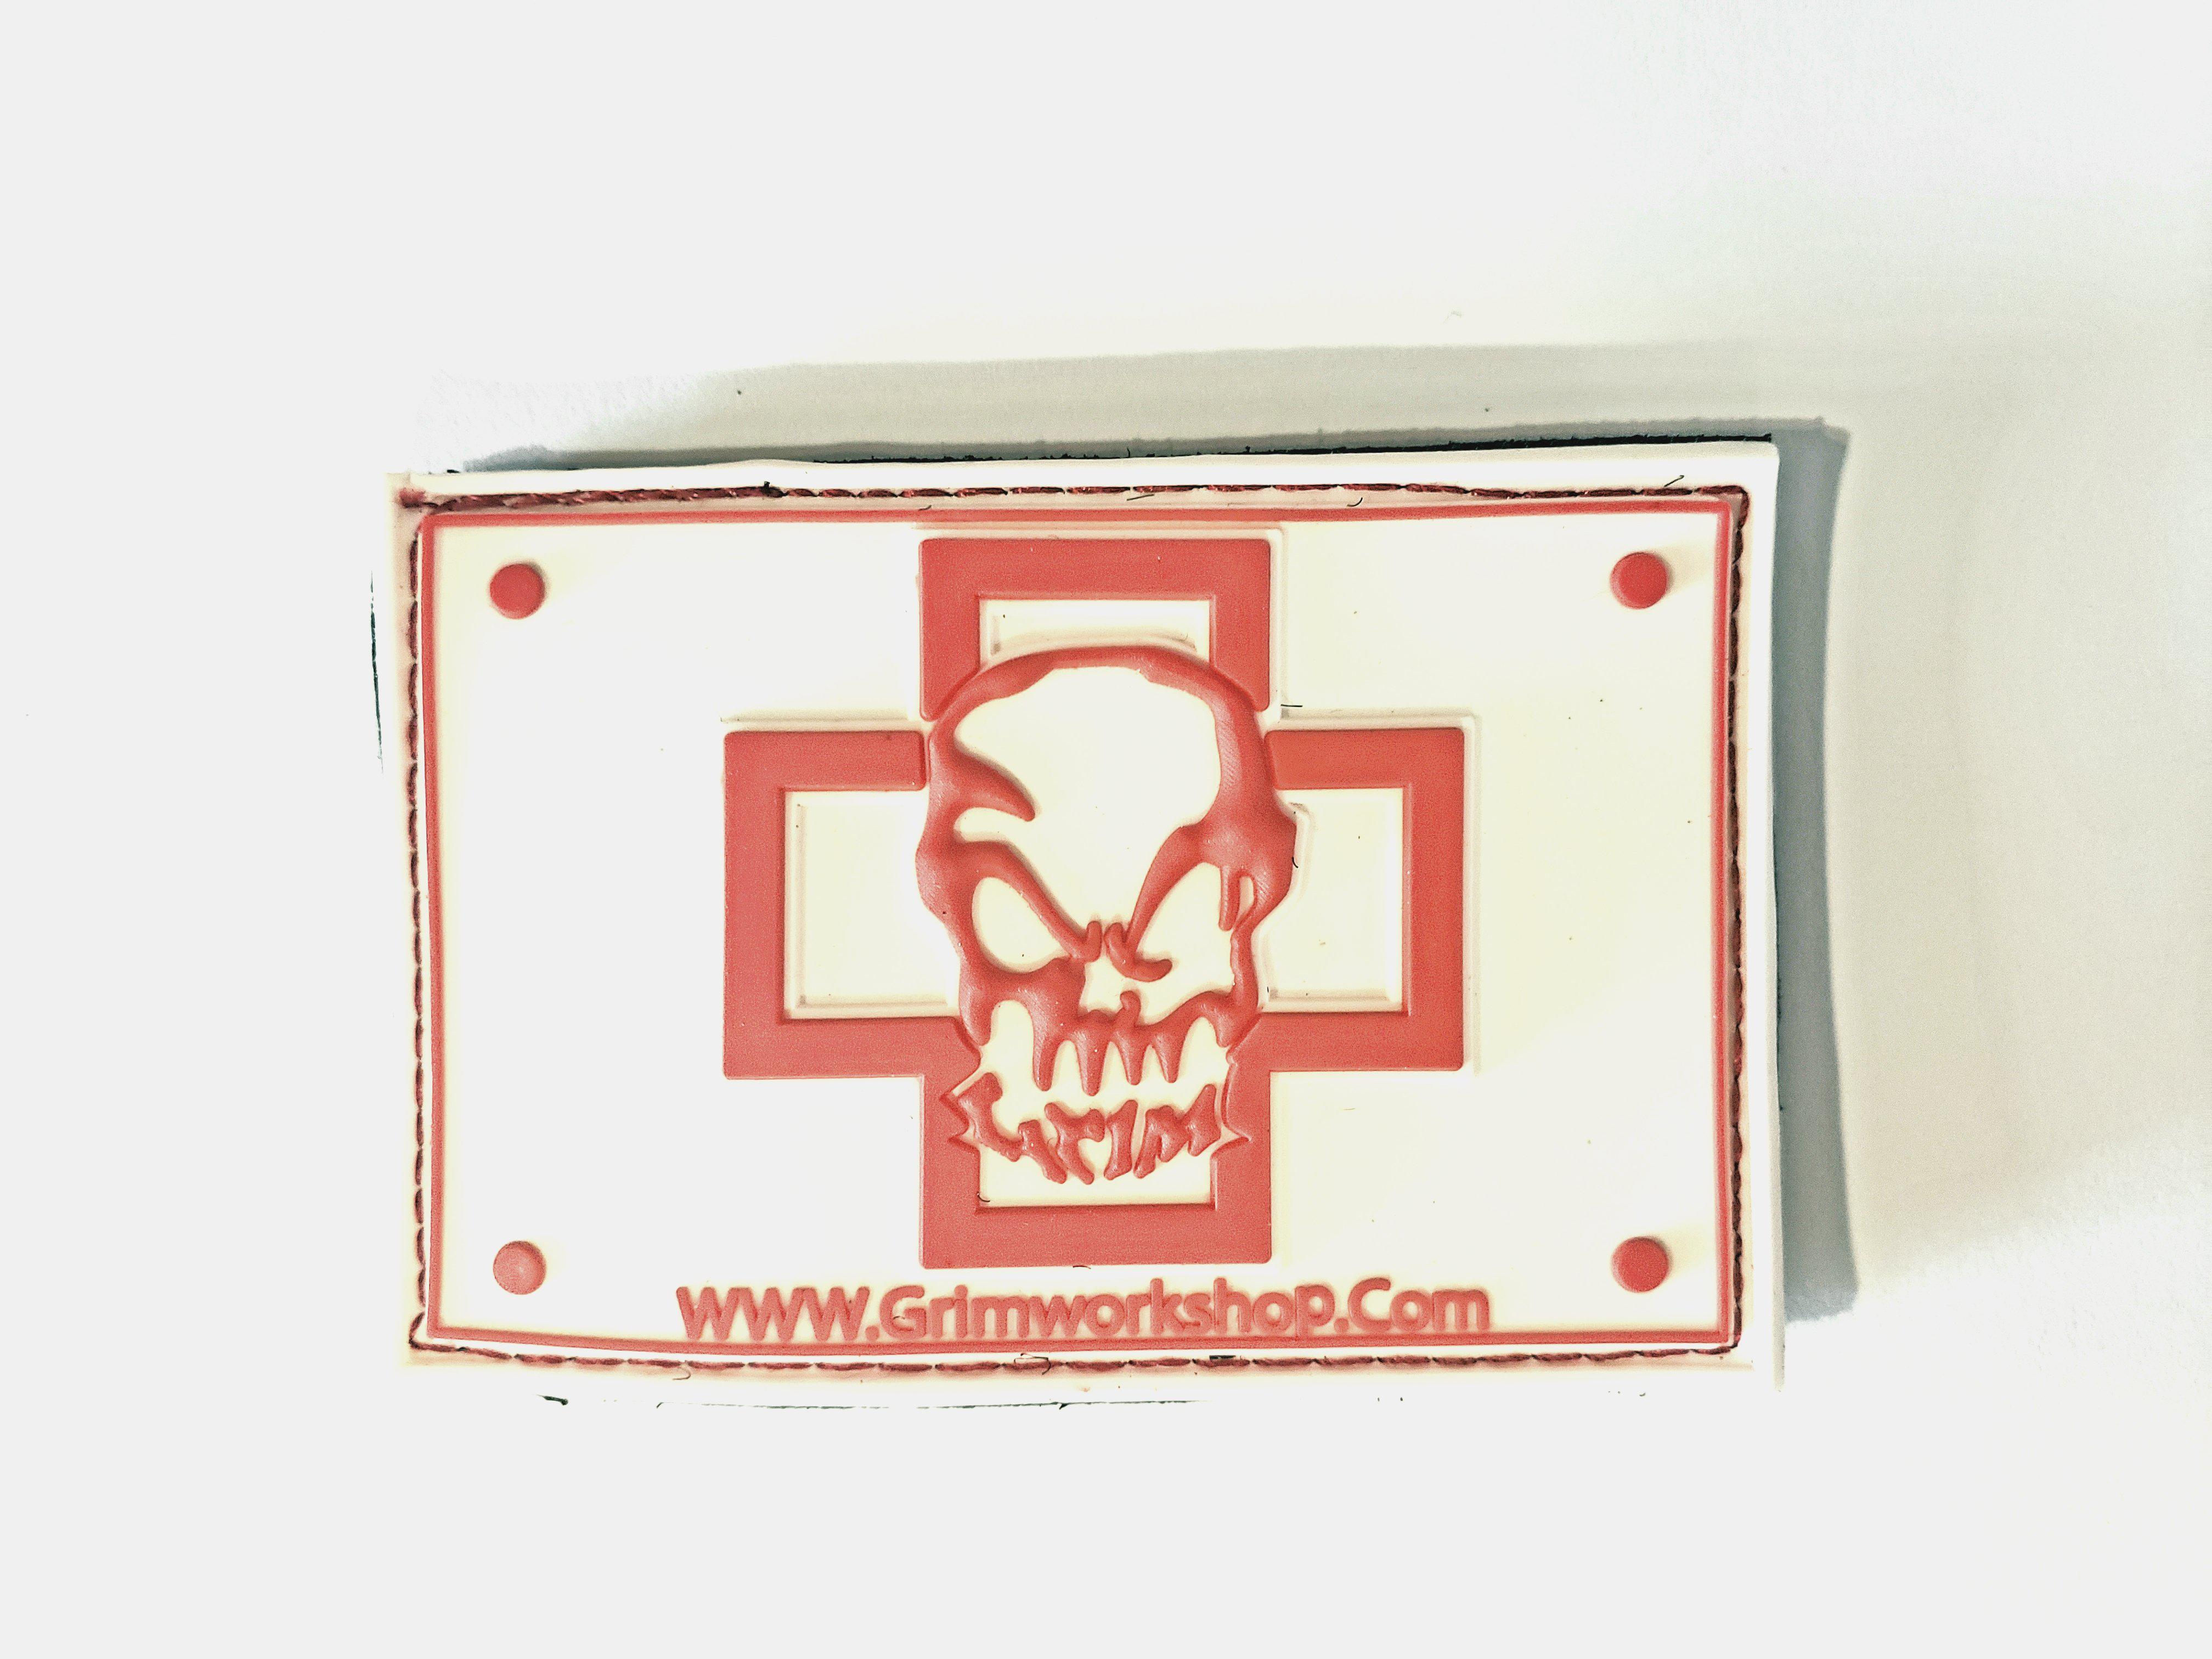 Medic First Aid ID Velcro Patch